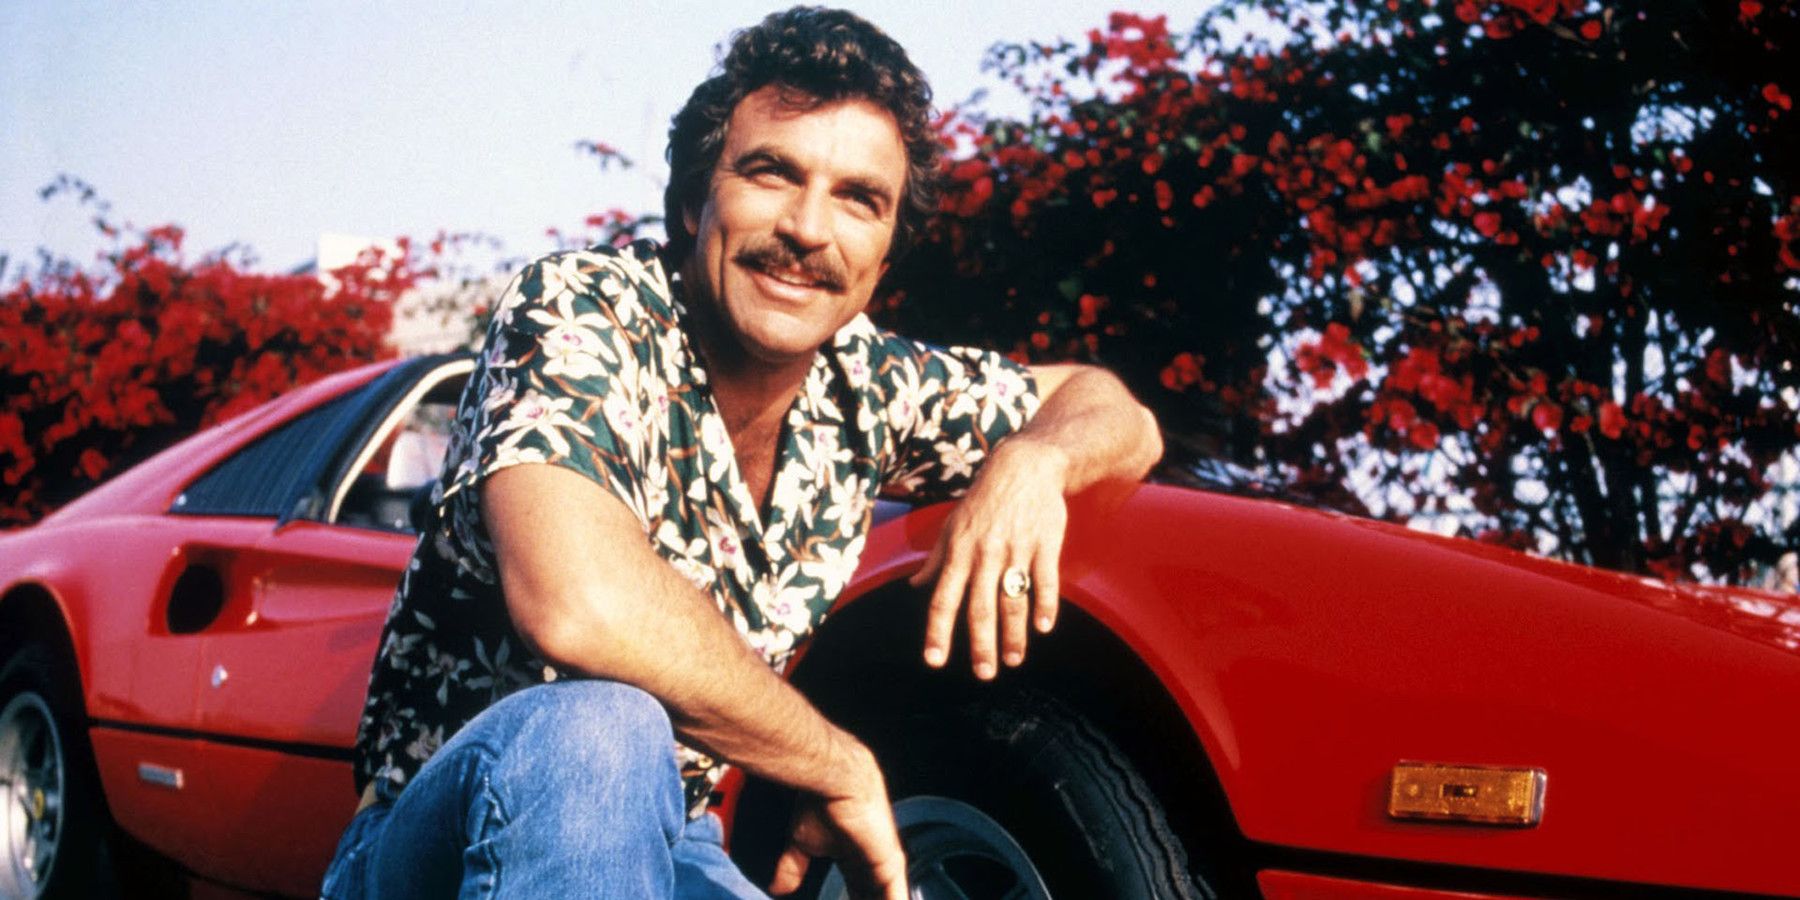 Tom Selleck in a promotional image for Magnum PI